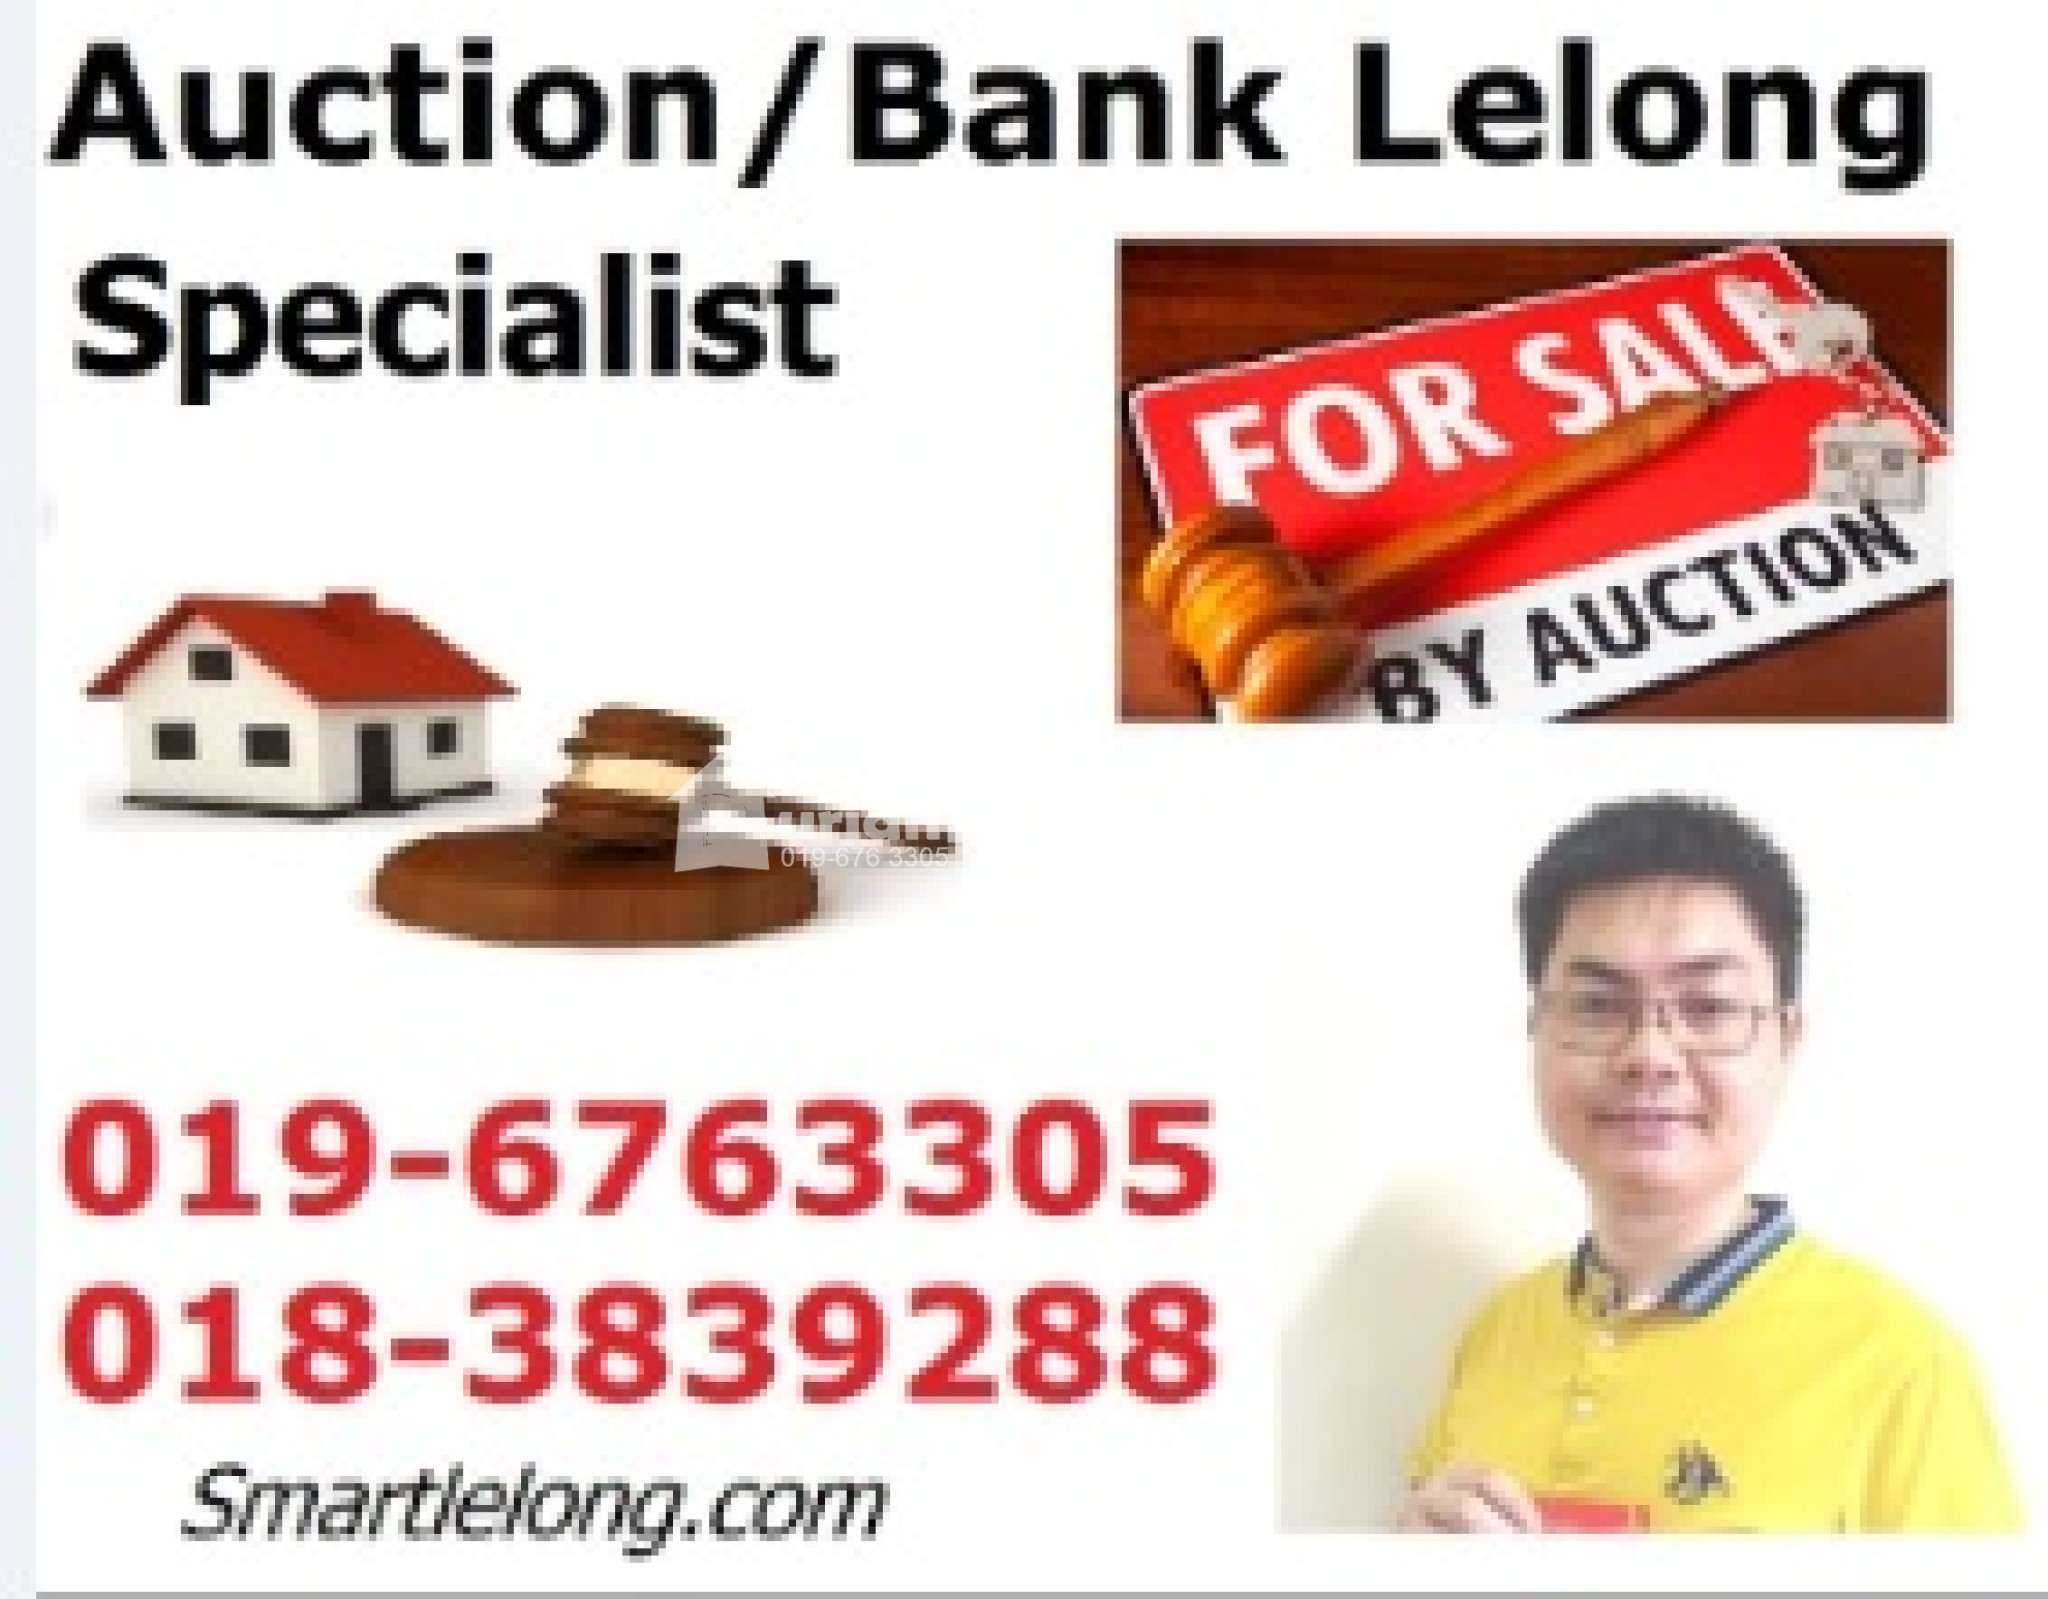 Commercial Land For Auction at Tanah Merah